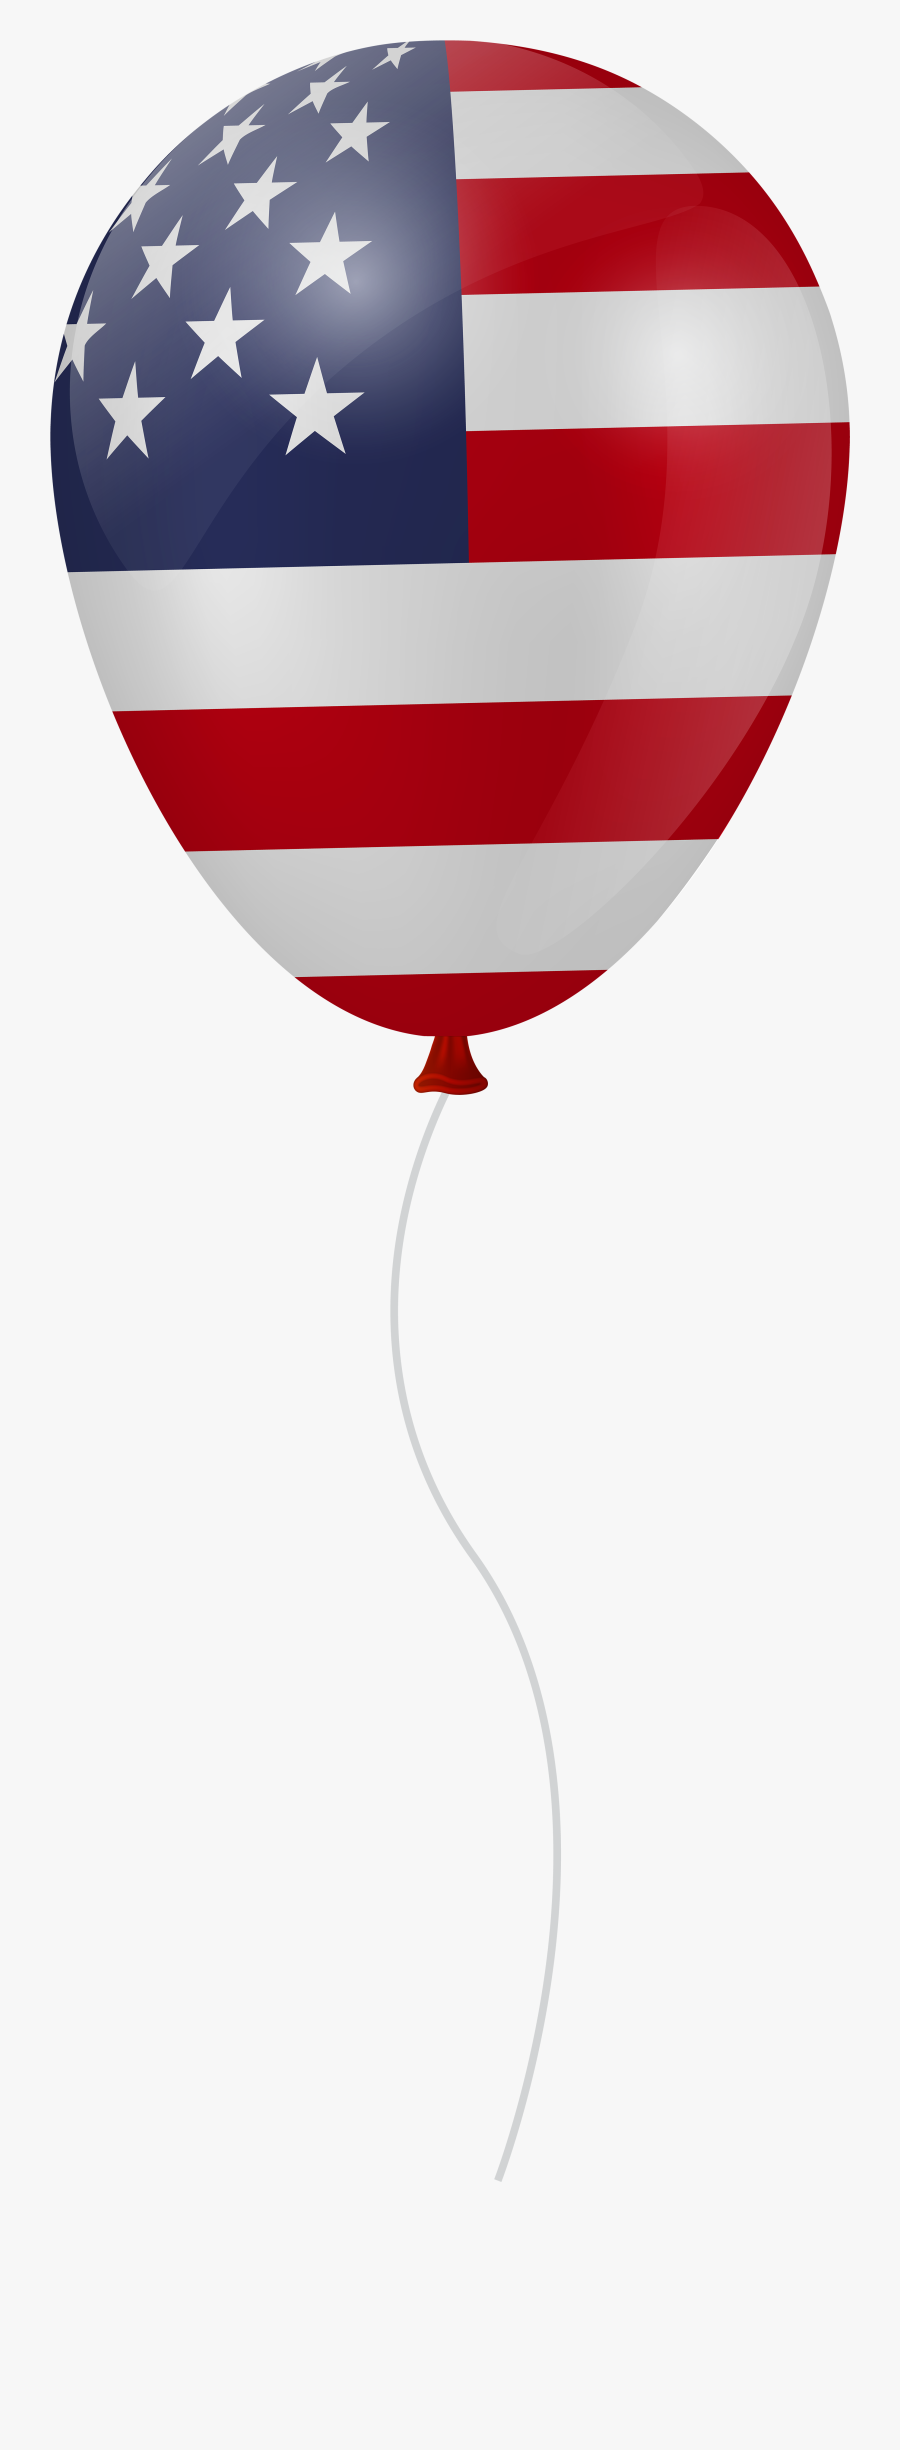 Clipart Balloon 4th July - 4th July Balloon Png, Transparent Clipart